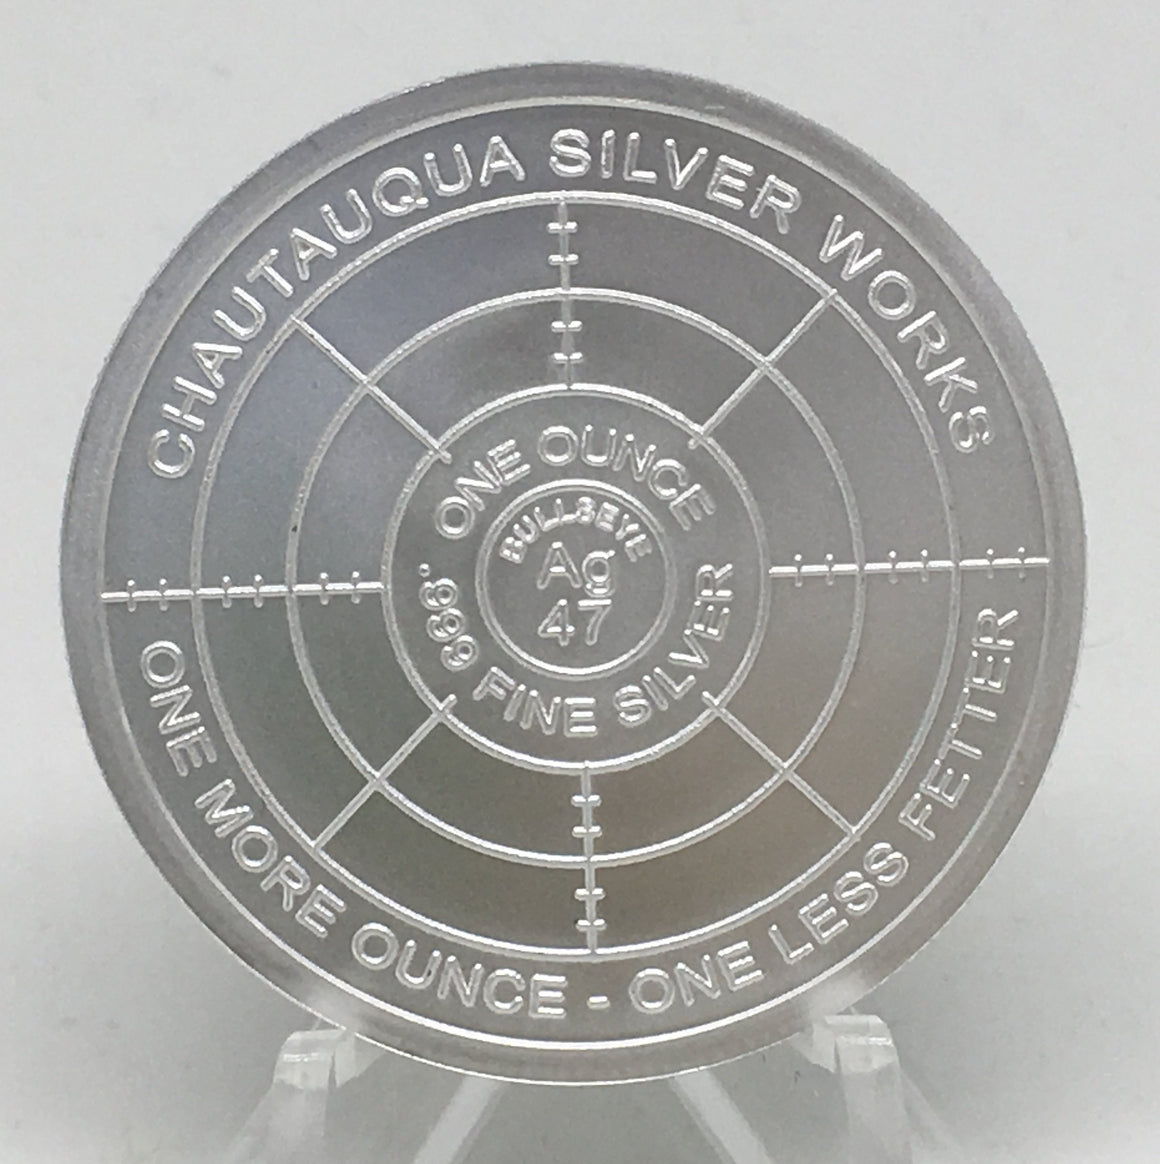 Toxic Series Too #2 Never A Thought, BU Finish by Chautauqua Silver Works, 1oz .999 Silver Round.